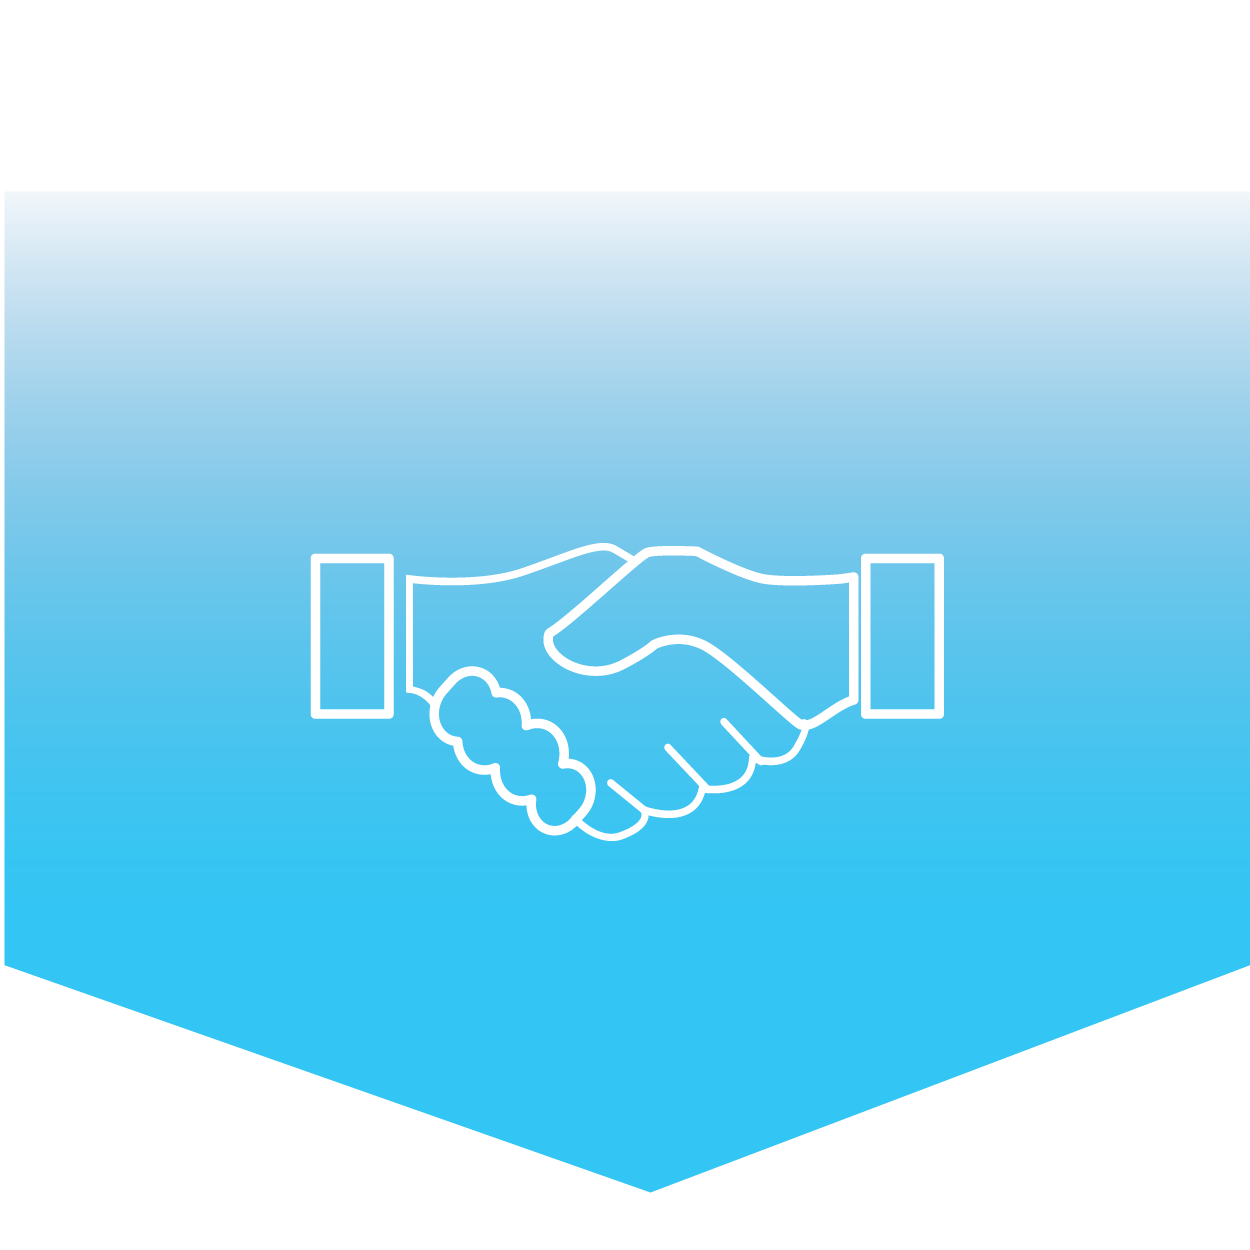 Expand the partnership opportunities